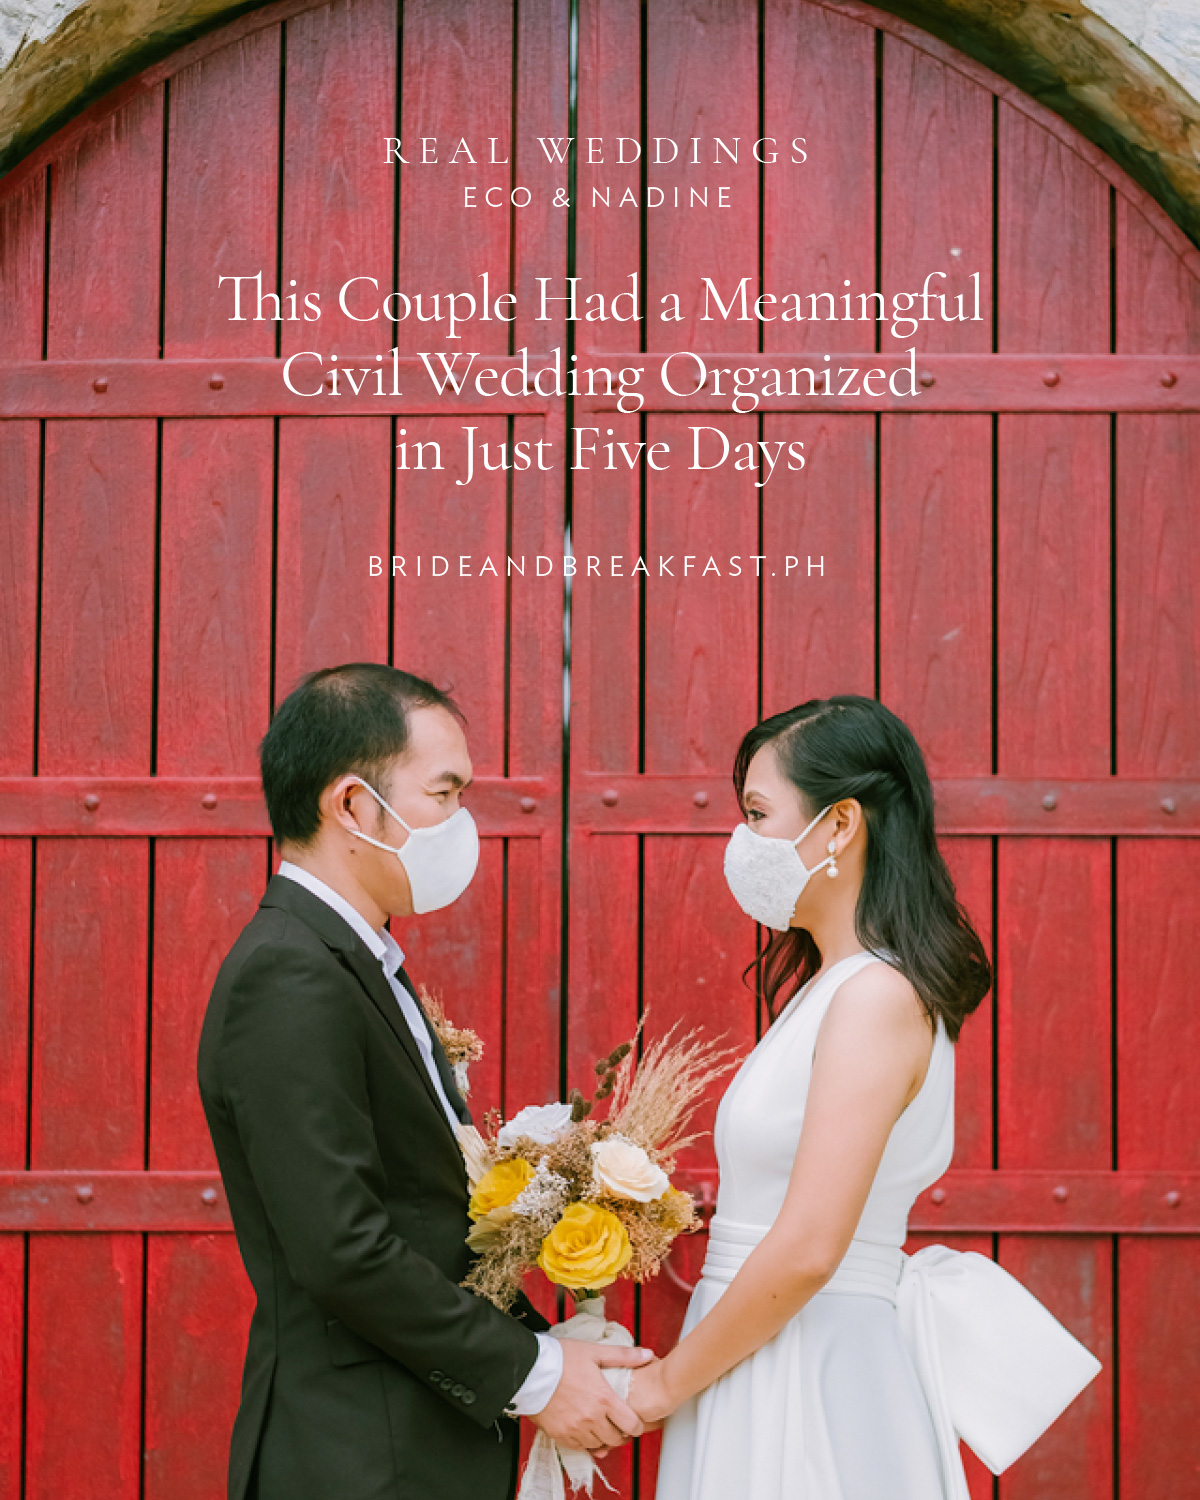 This Couple Had a Meaningful Civil Wedding Organized in Just Five Days